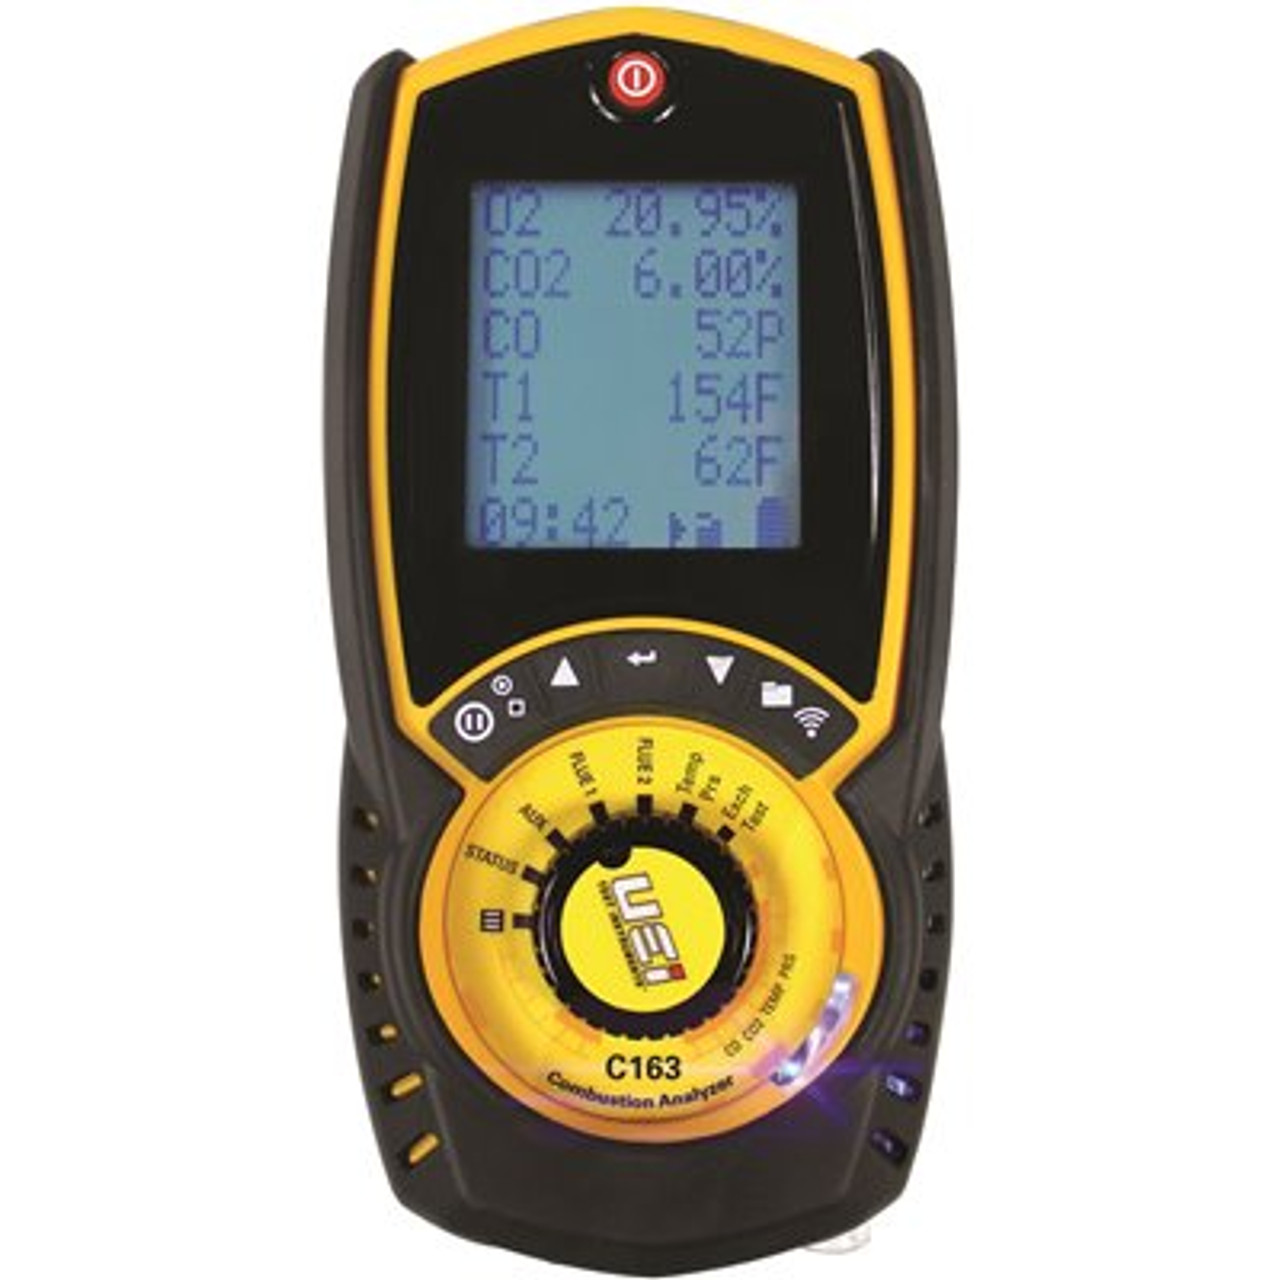 UEi Test Instruments Residential/Commercial Combustion Analyzer with Pressure